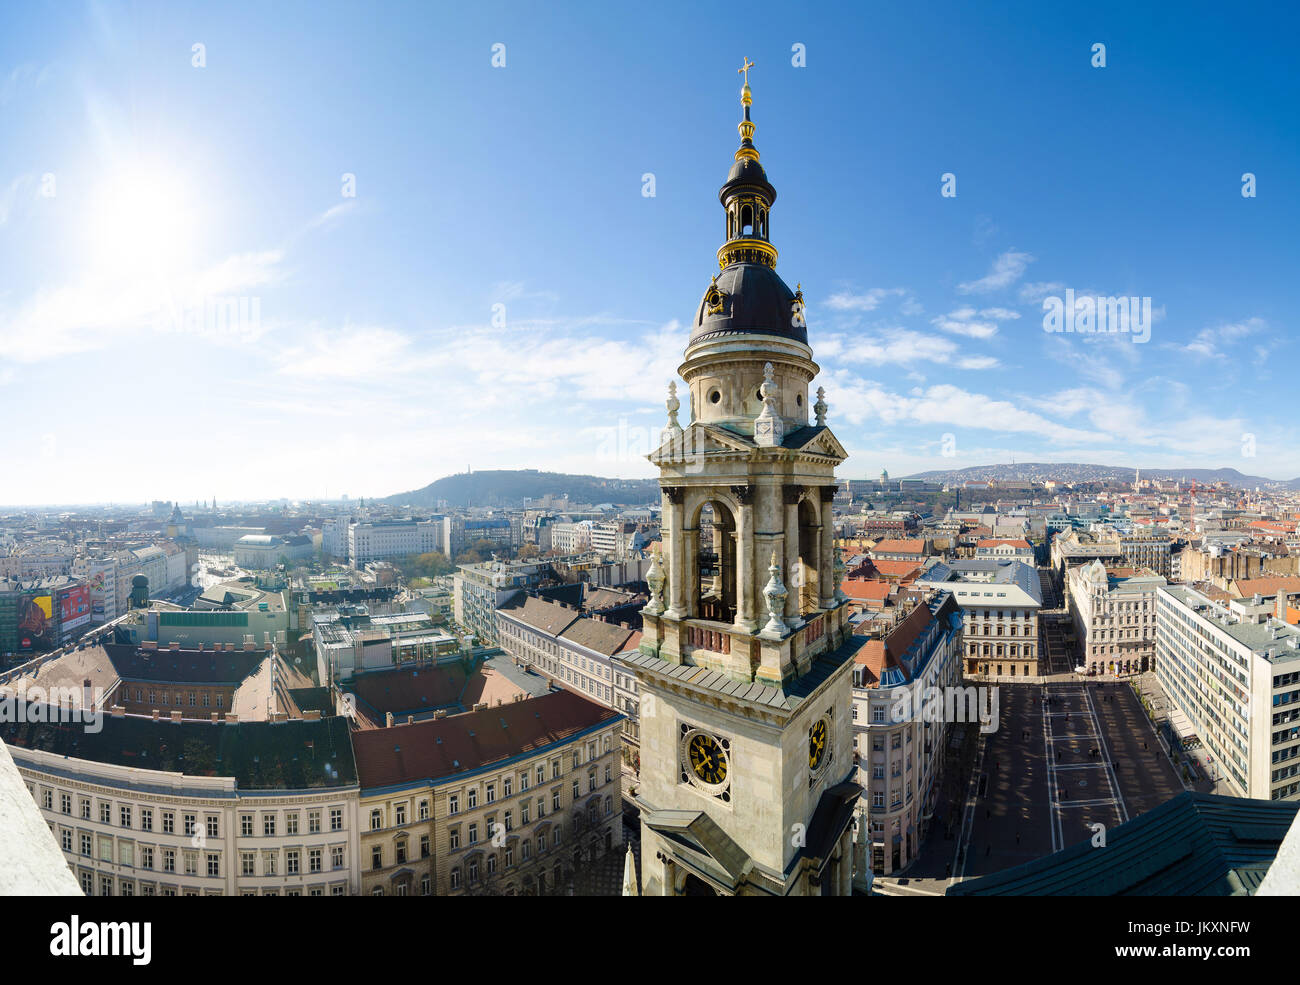 BUDAPEST, HUNGARY - FEBRUARY 22, 2016: Panorama of Budapest, Hungary taken from the tower of Saint Istvan cathedral Stock Photo